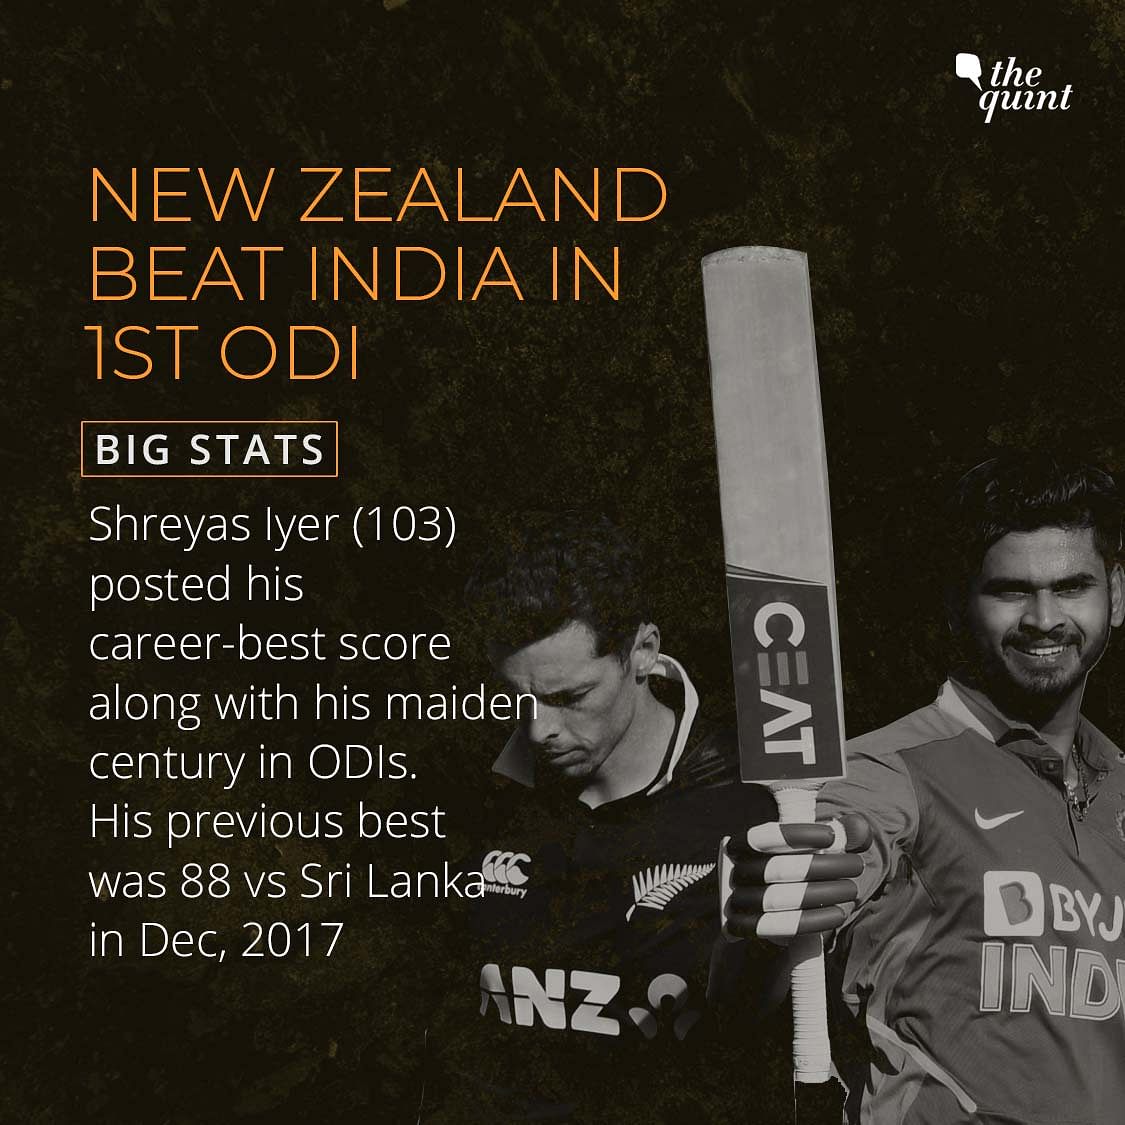 Ross Taylor’s unbeaten century helped New Zealand beat India by 4 wickets in the ODI series-opener.